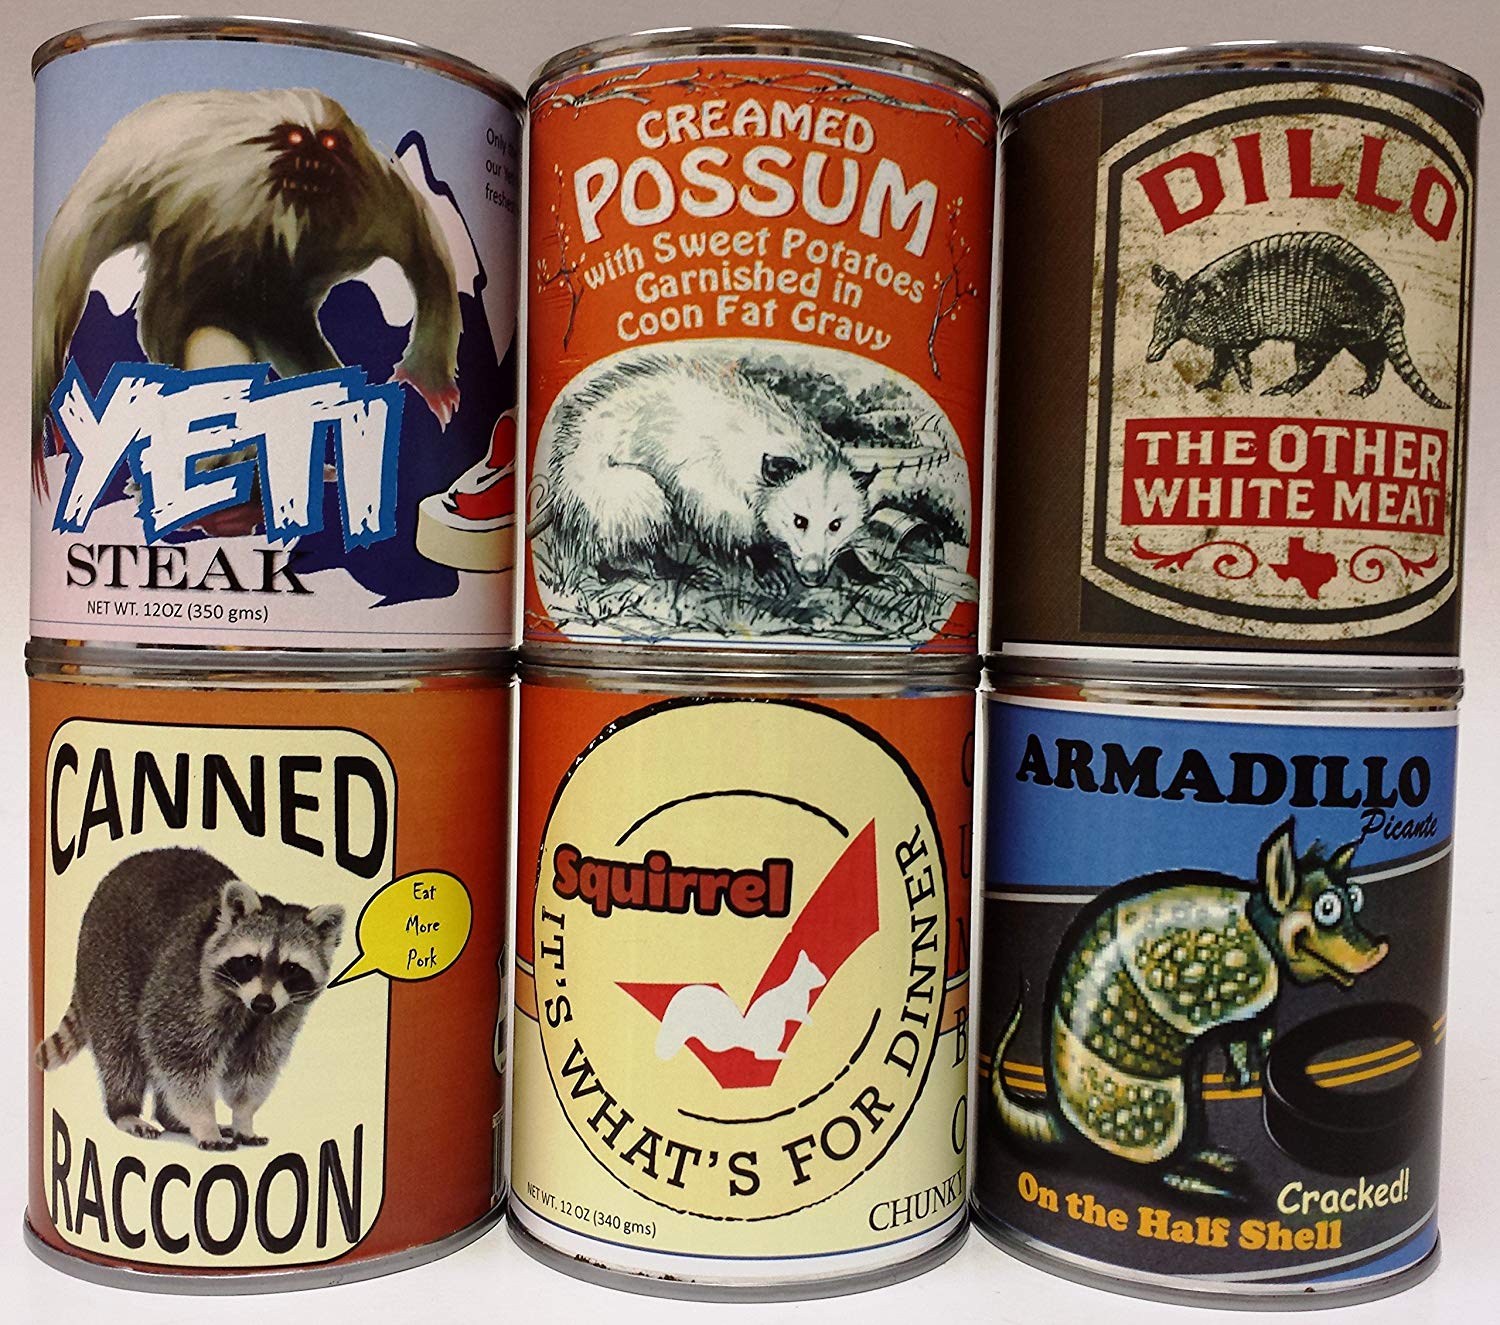 Six-Pack of Gag Canned Meat: Creamed Possum, Armadillo, Dillo, Raccoon, Yeti and Squirrel!